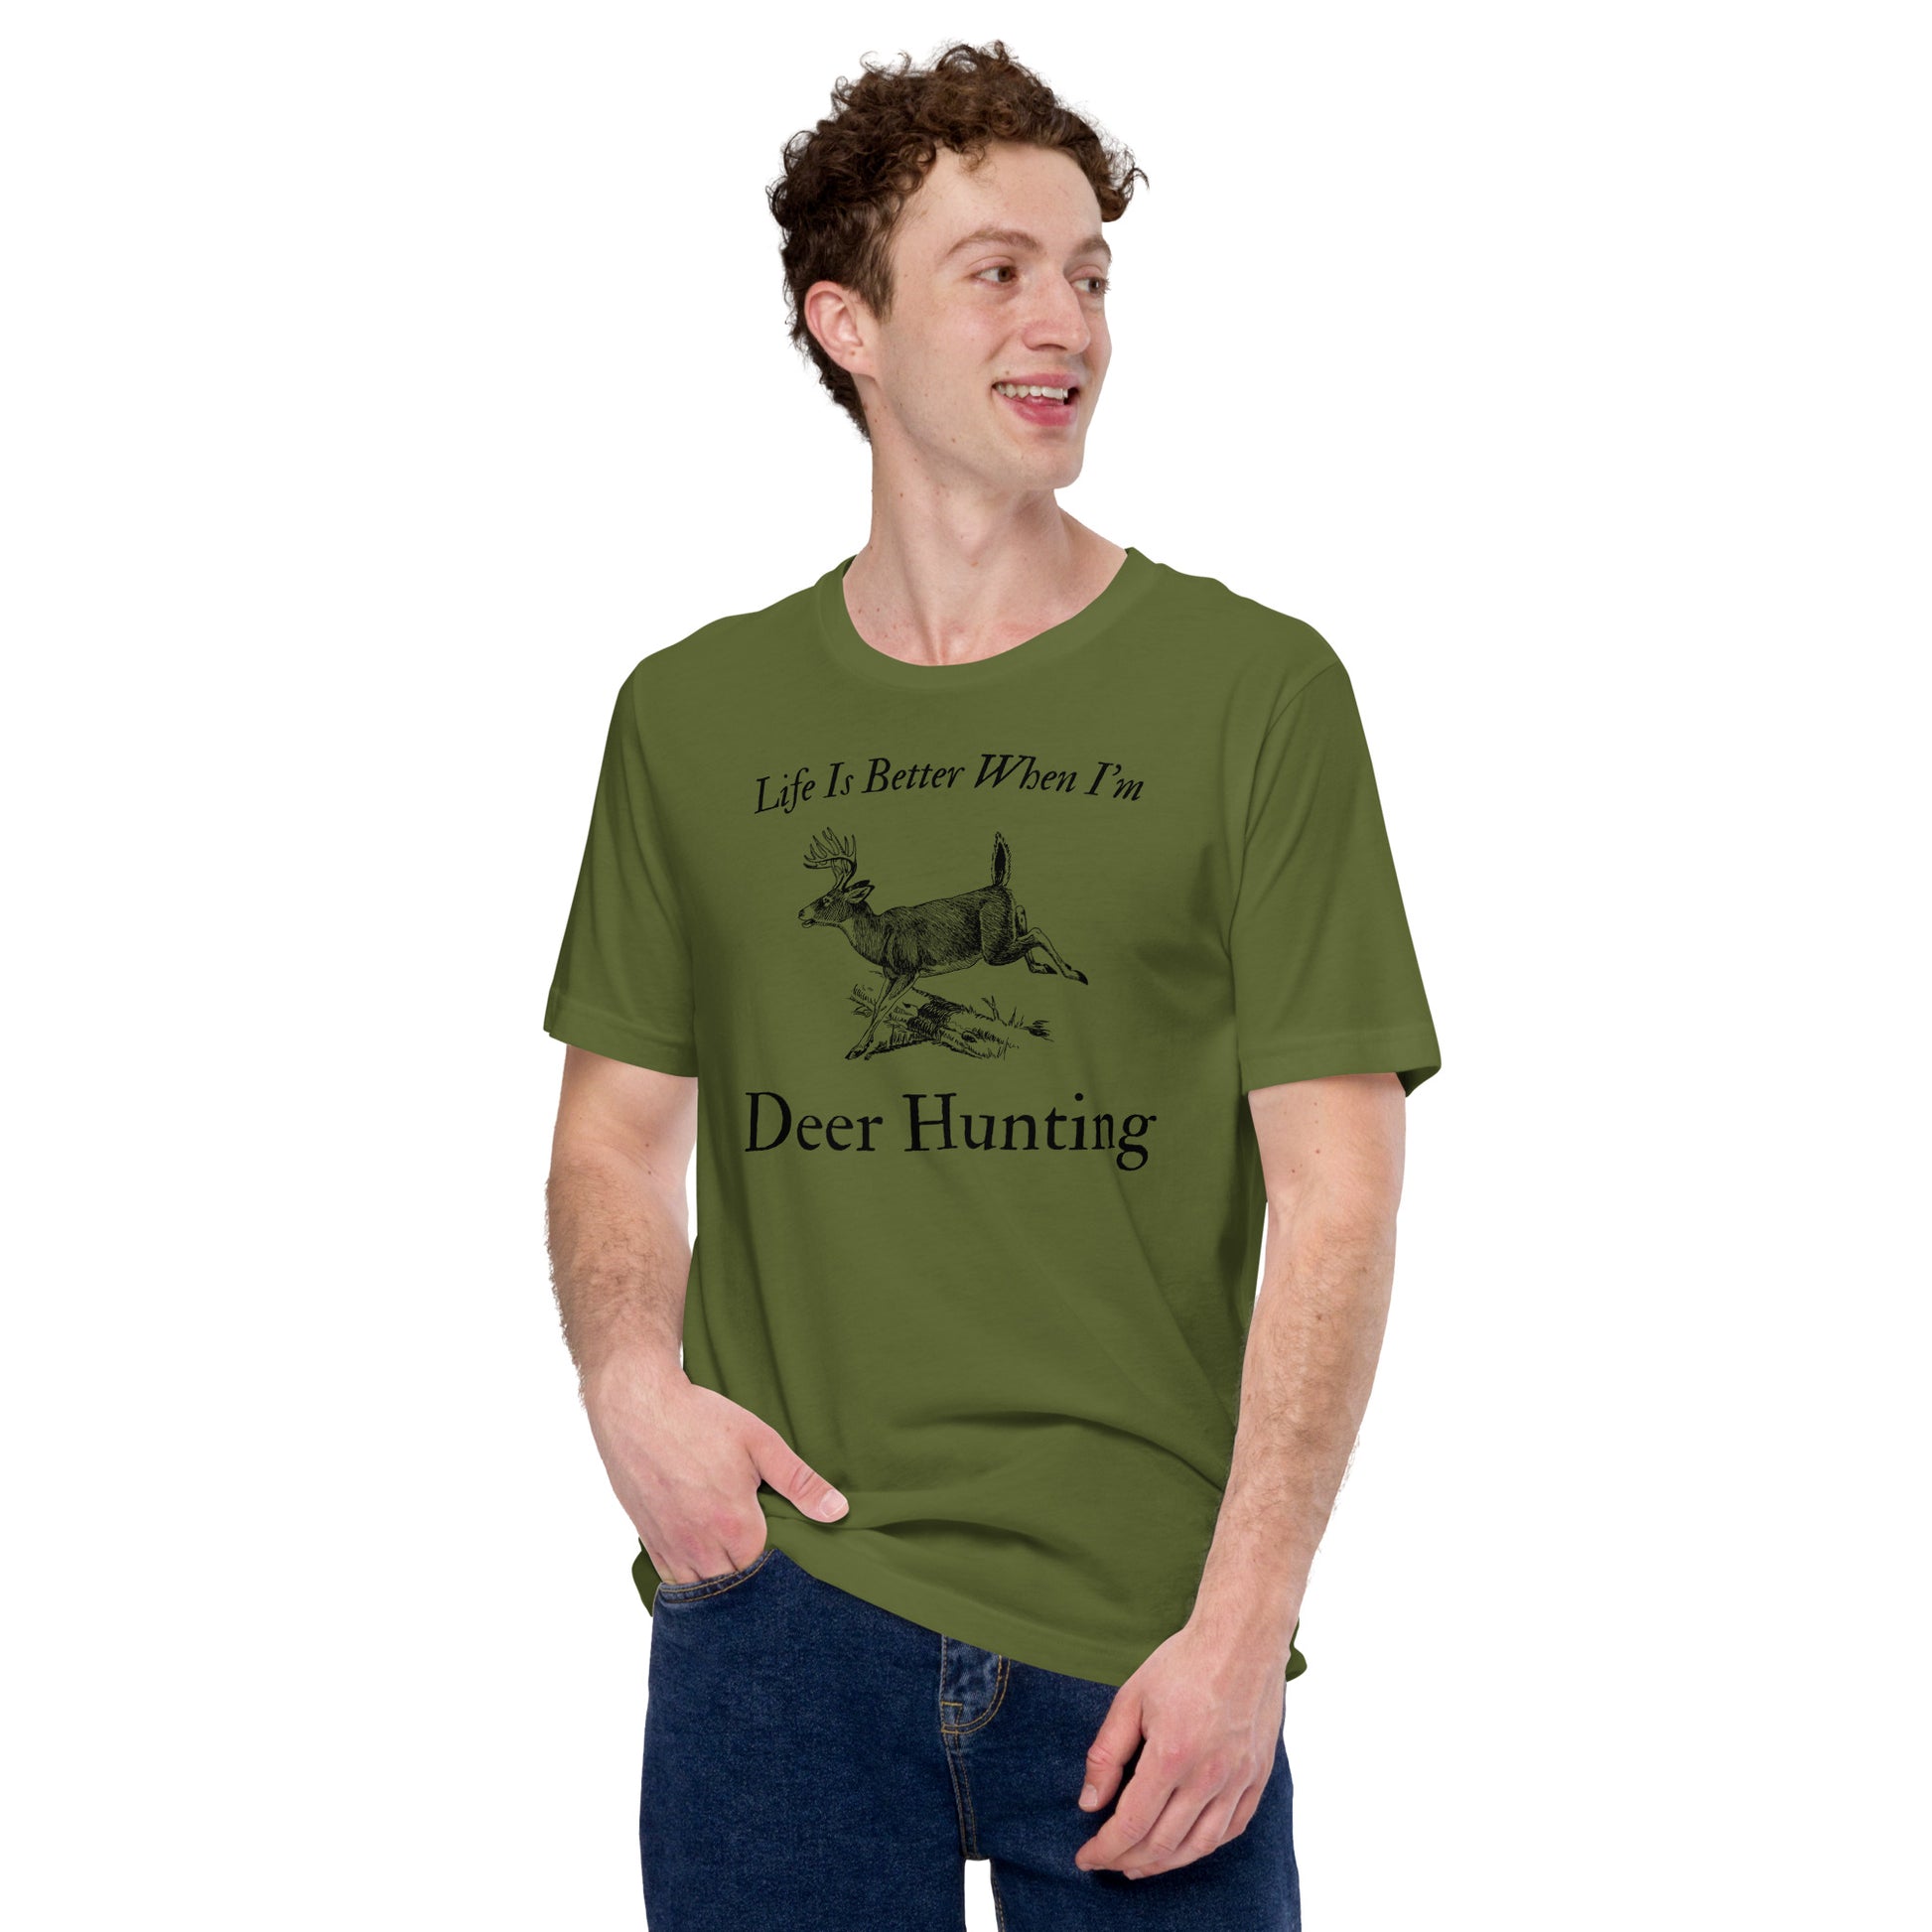 Comfortable and durable 'Life is Better When Hunting' cotton t-shirt